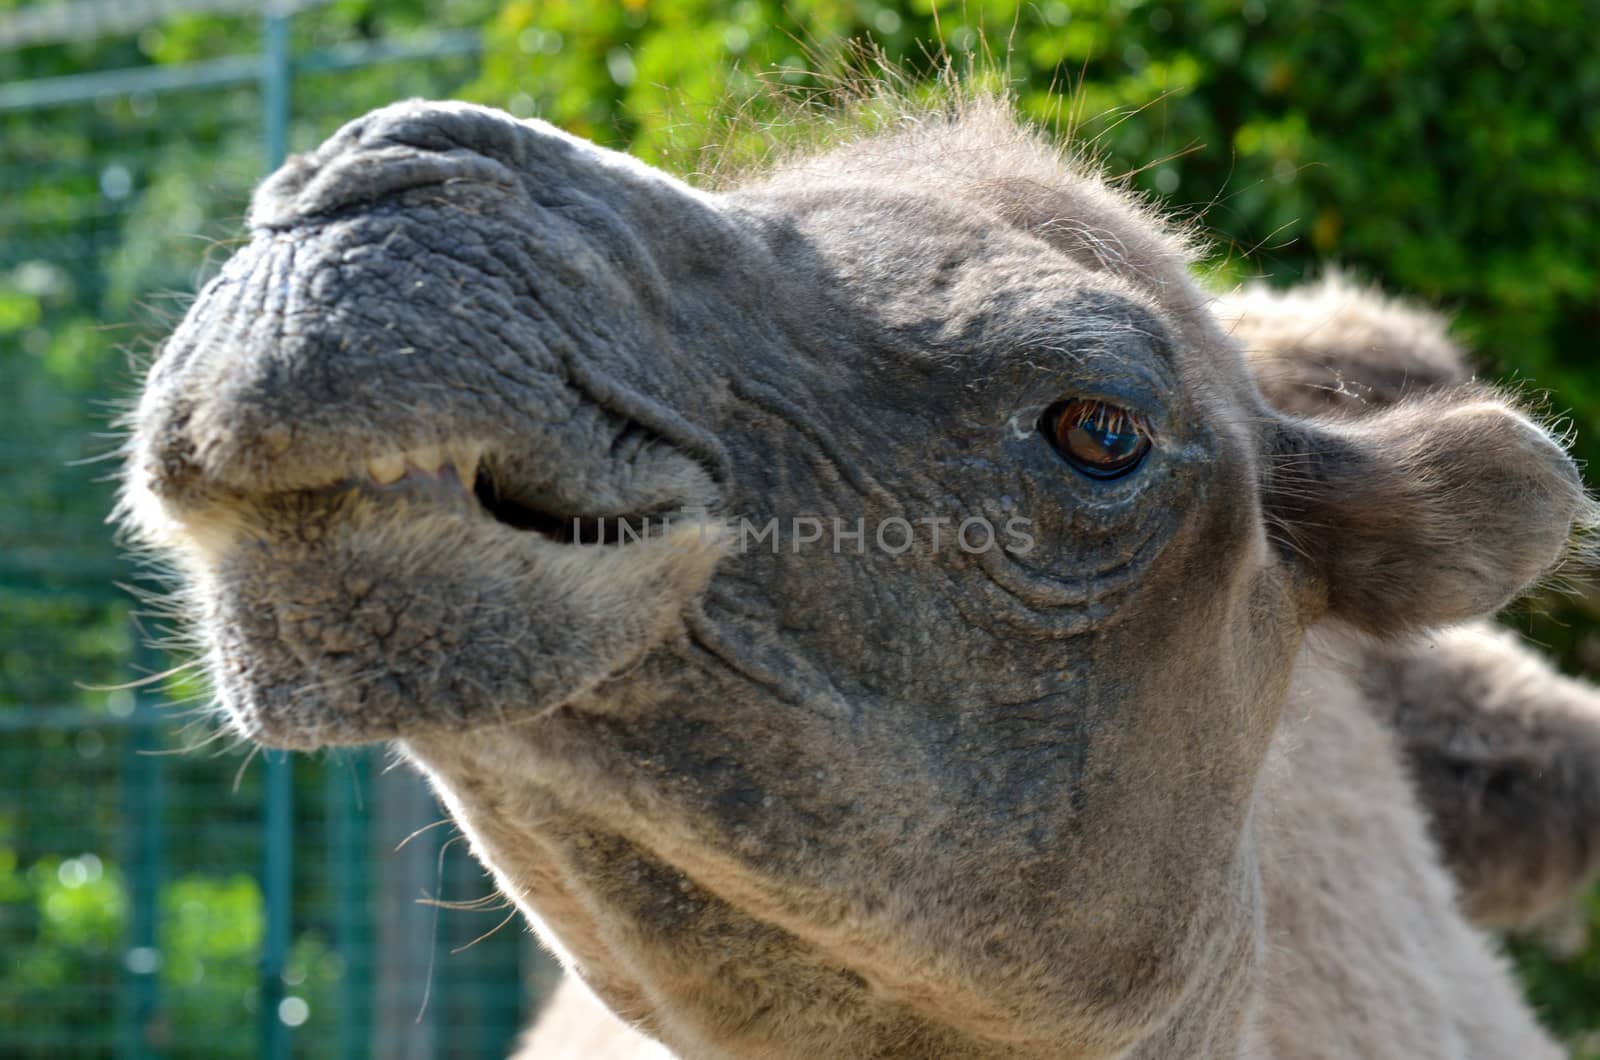 Head of Camel in close up